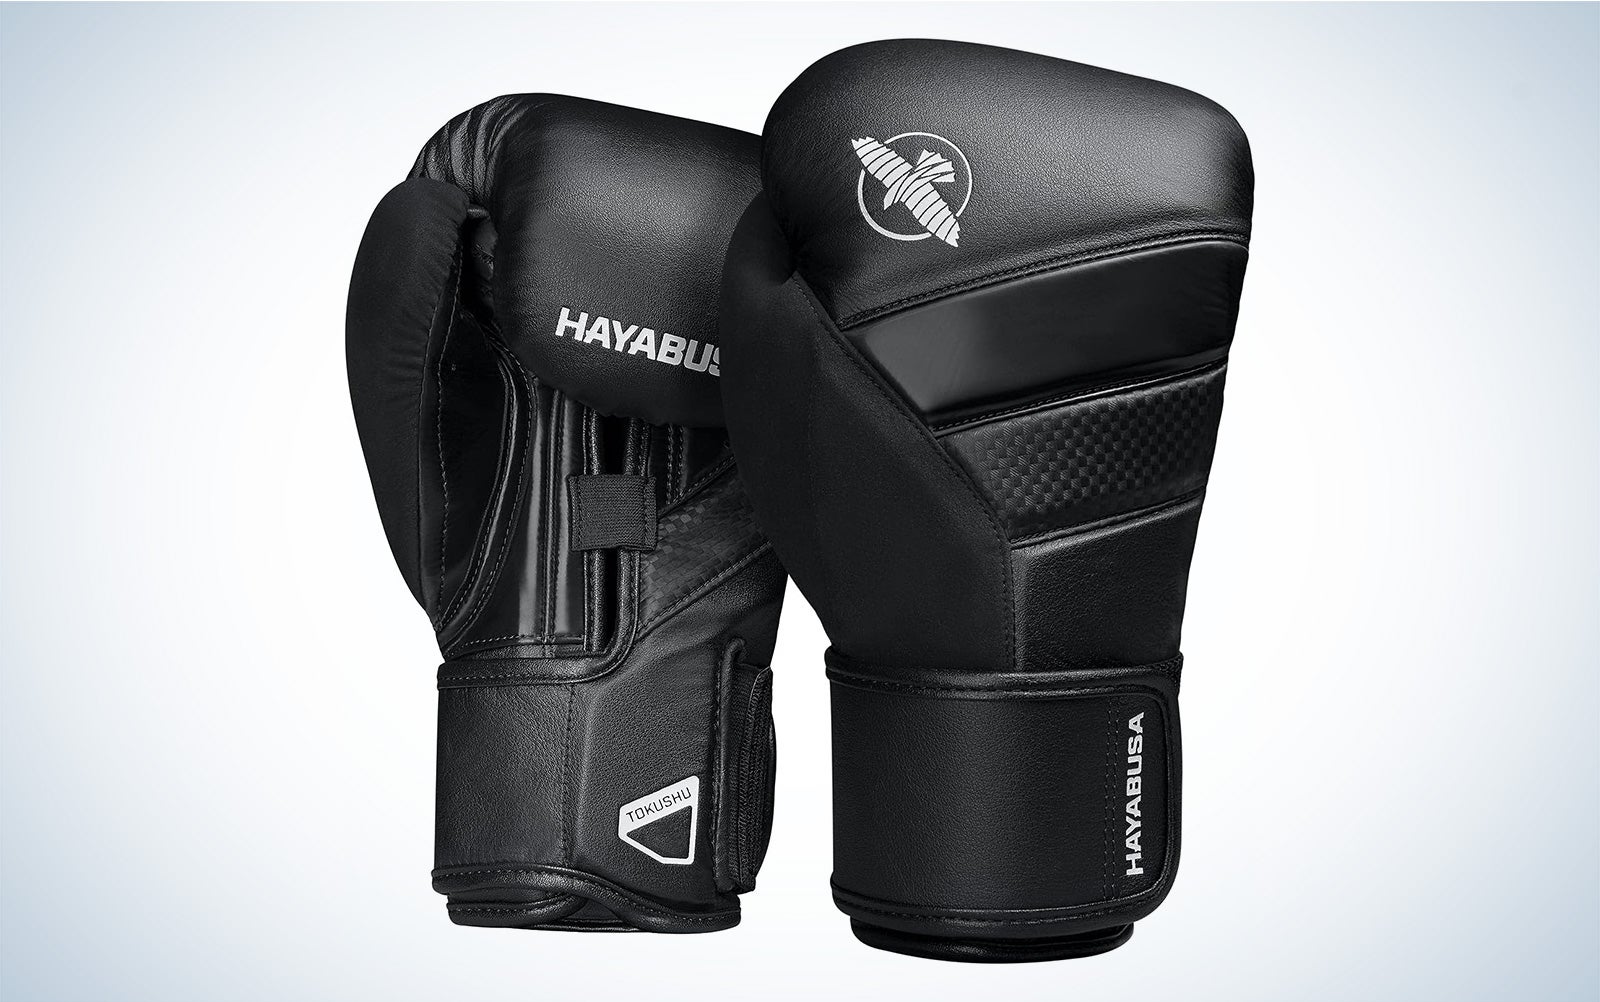 Hayabusa boxing gloves are great for beginners.